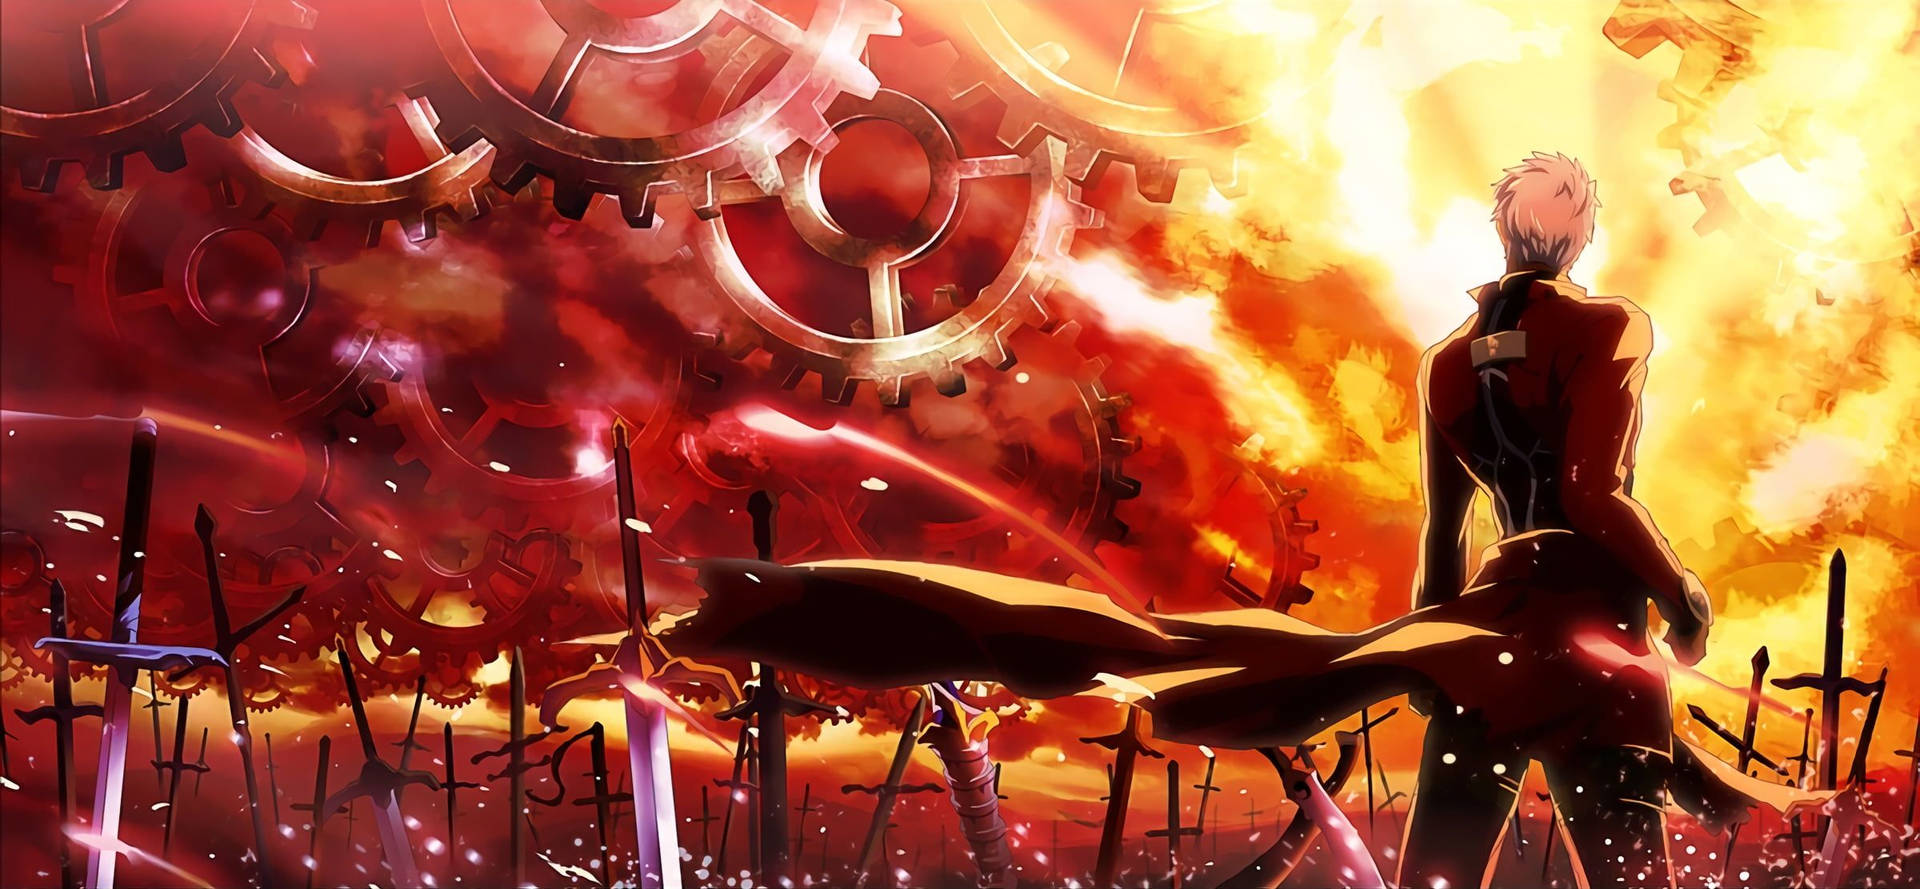 Fate Unlimited Blade Works Archer Wallpaper